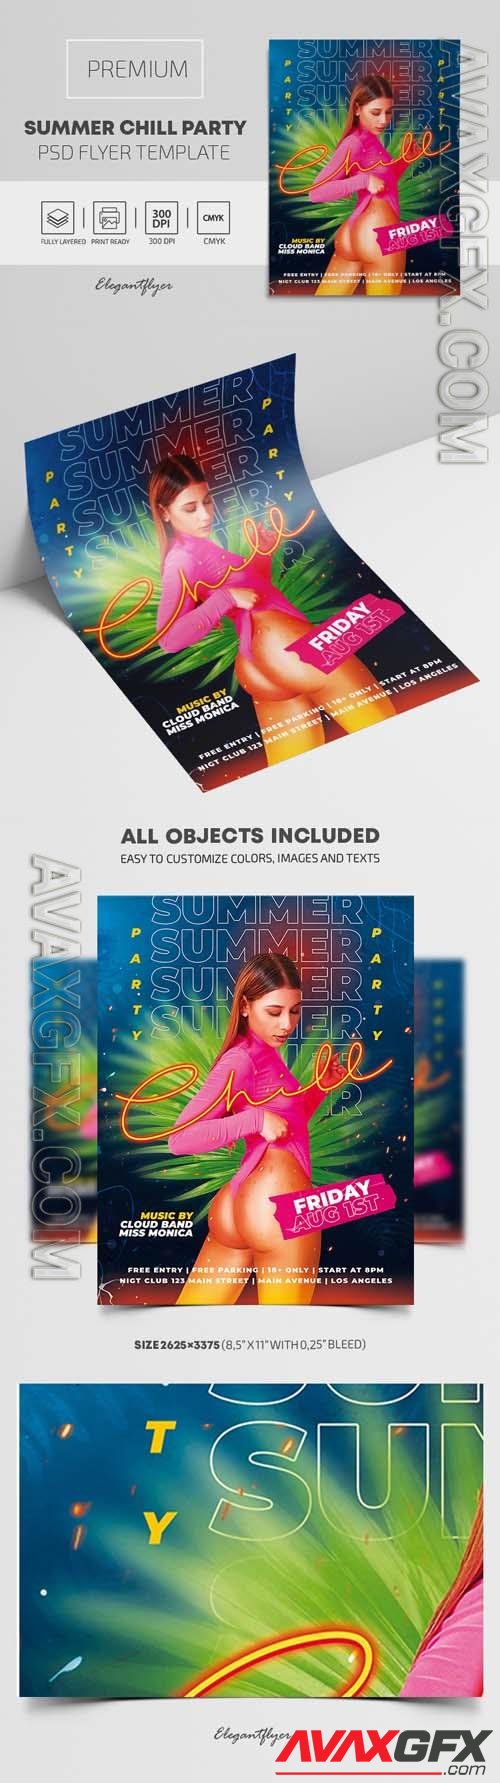 Summer Chill Party – Premium PSD Flyer Template